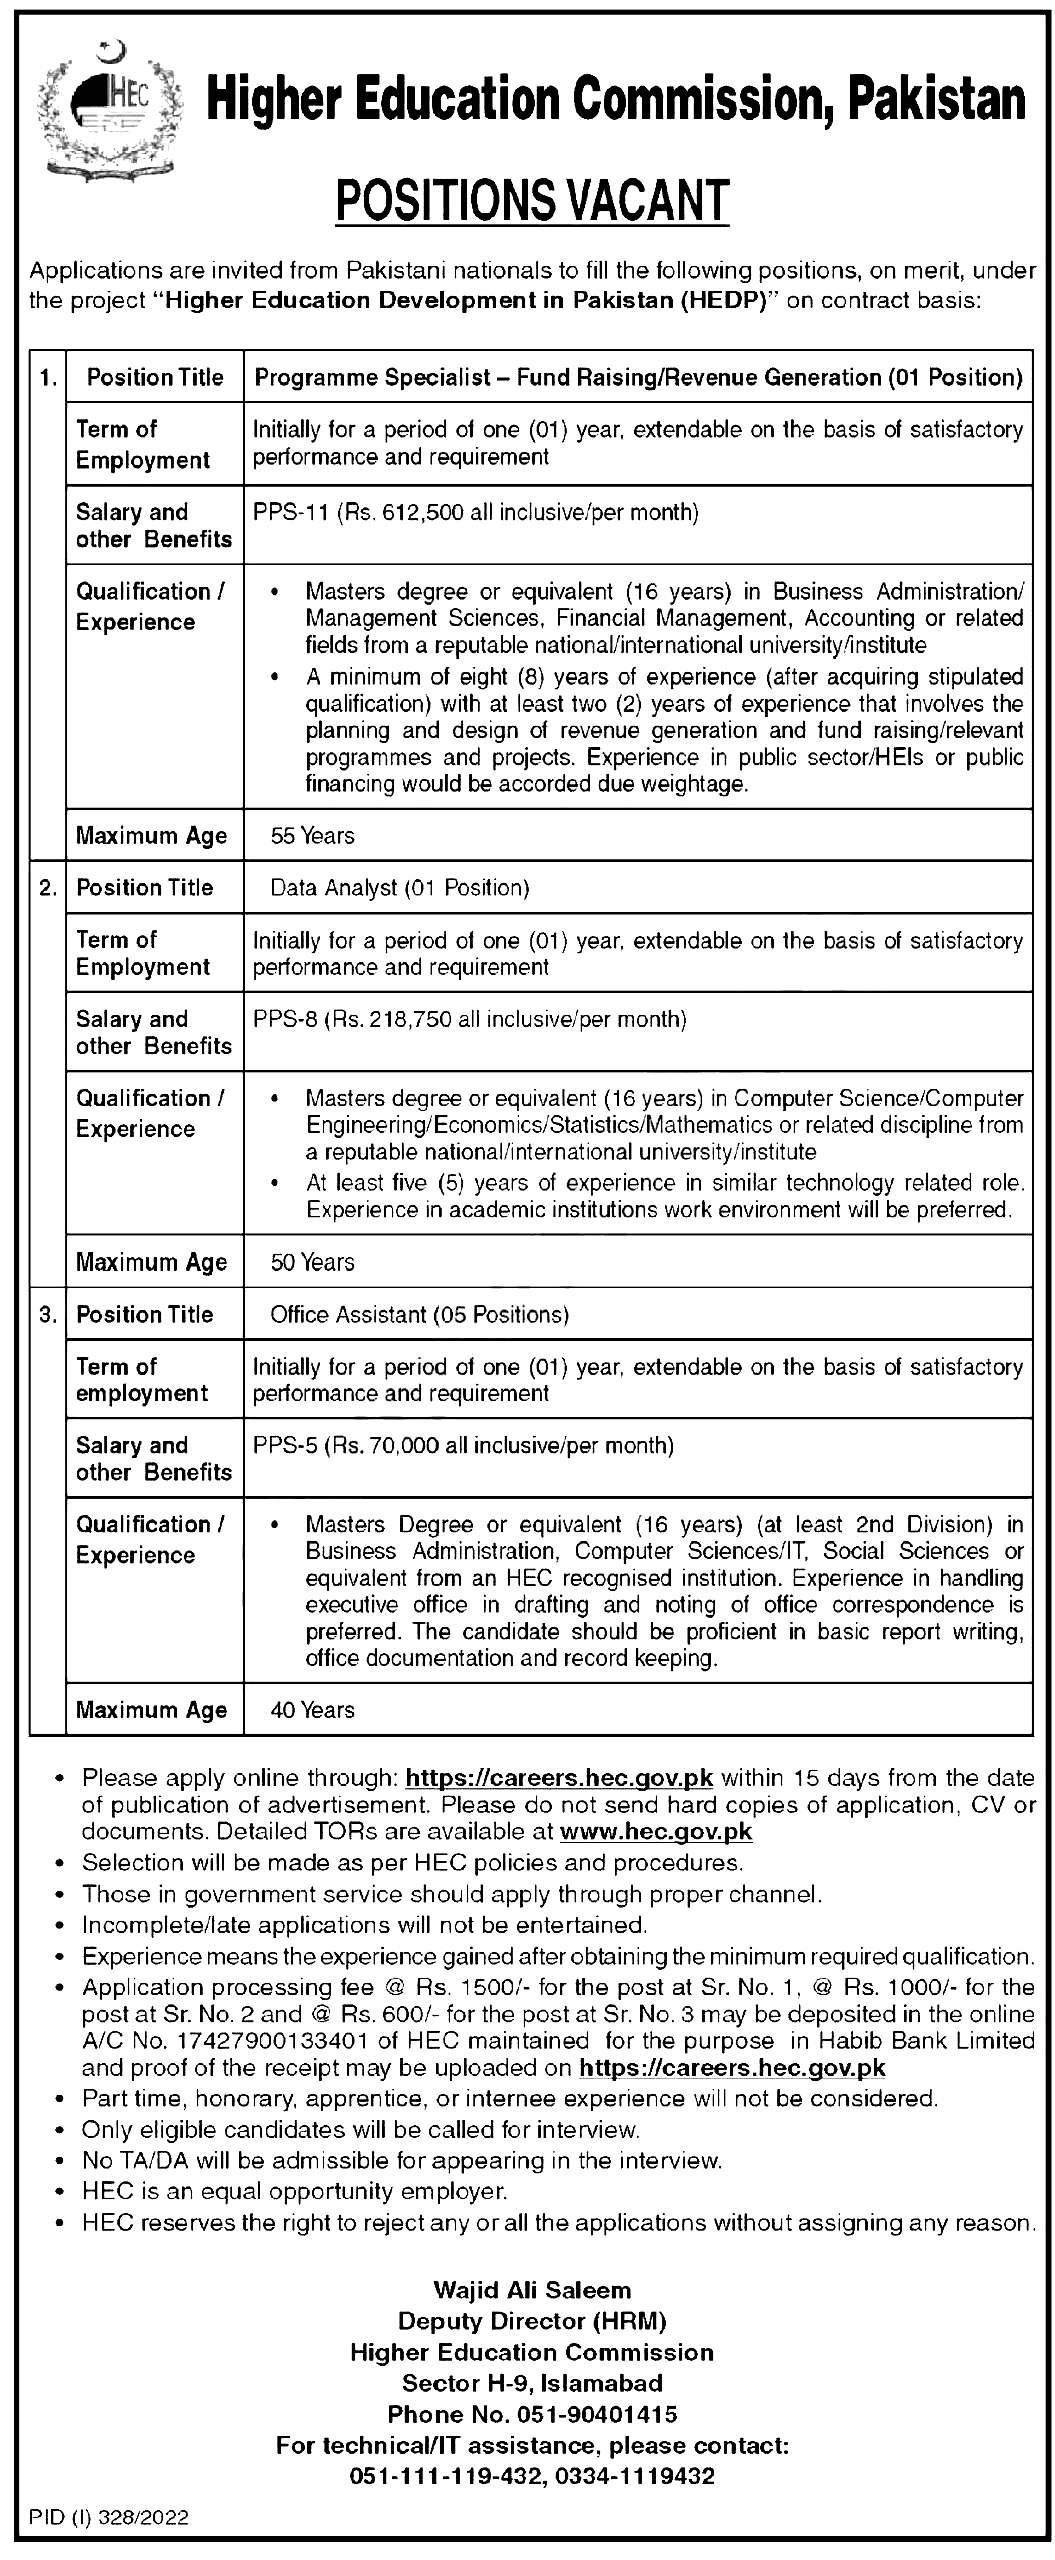 Higher Education Commission HEC jobs 2022 Apply Online Last Date